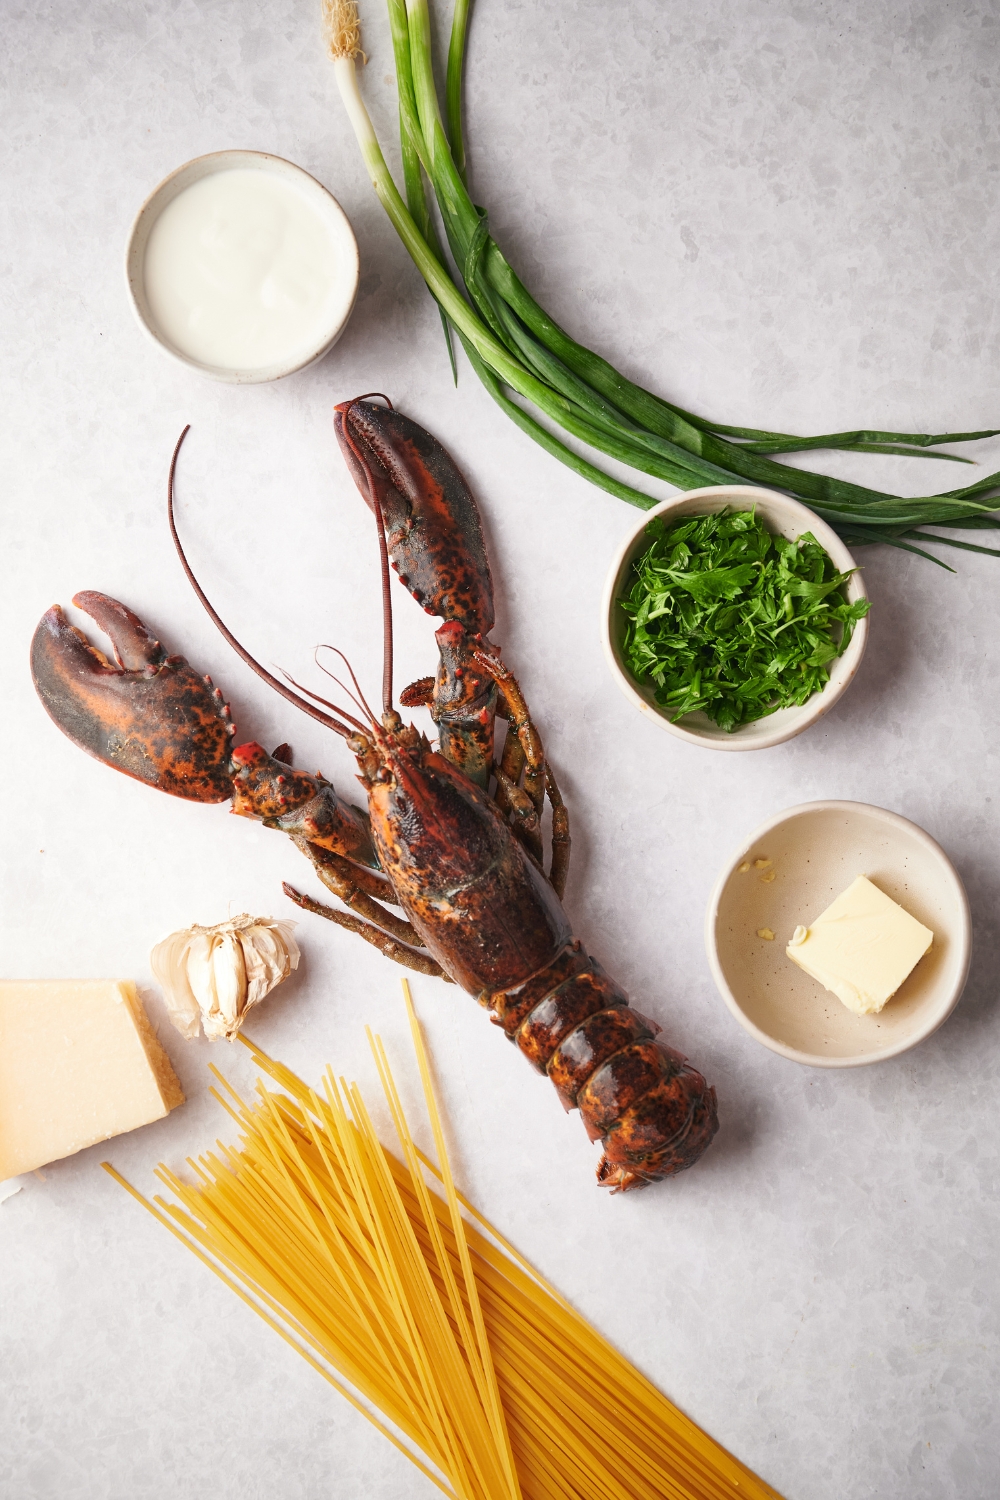 An assortment of ingredients including a lobster, a bunch of scallions, a bunch of dried pasta, a block of parmesan cheese, some garlic cloves, and bowls of cream, butter, and fresh herbs.